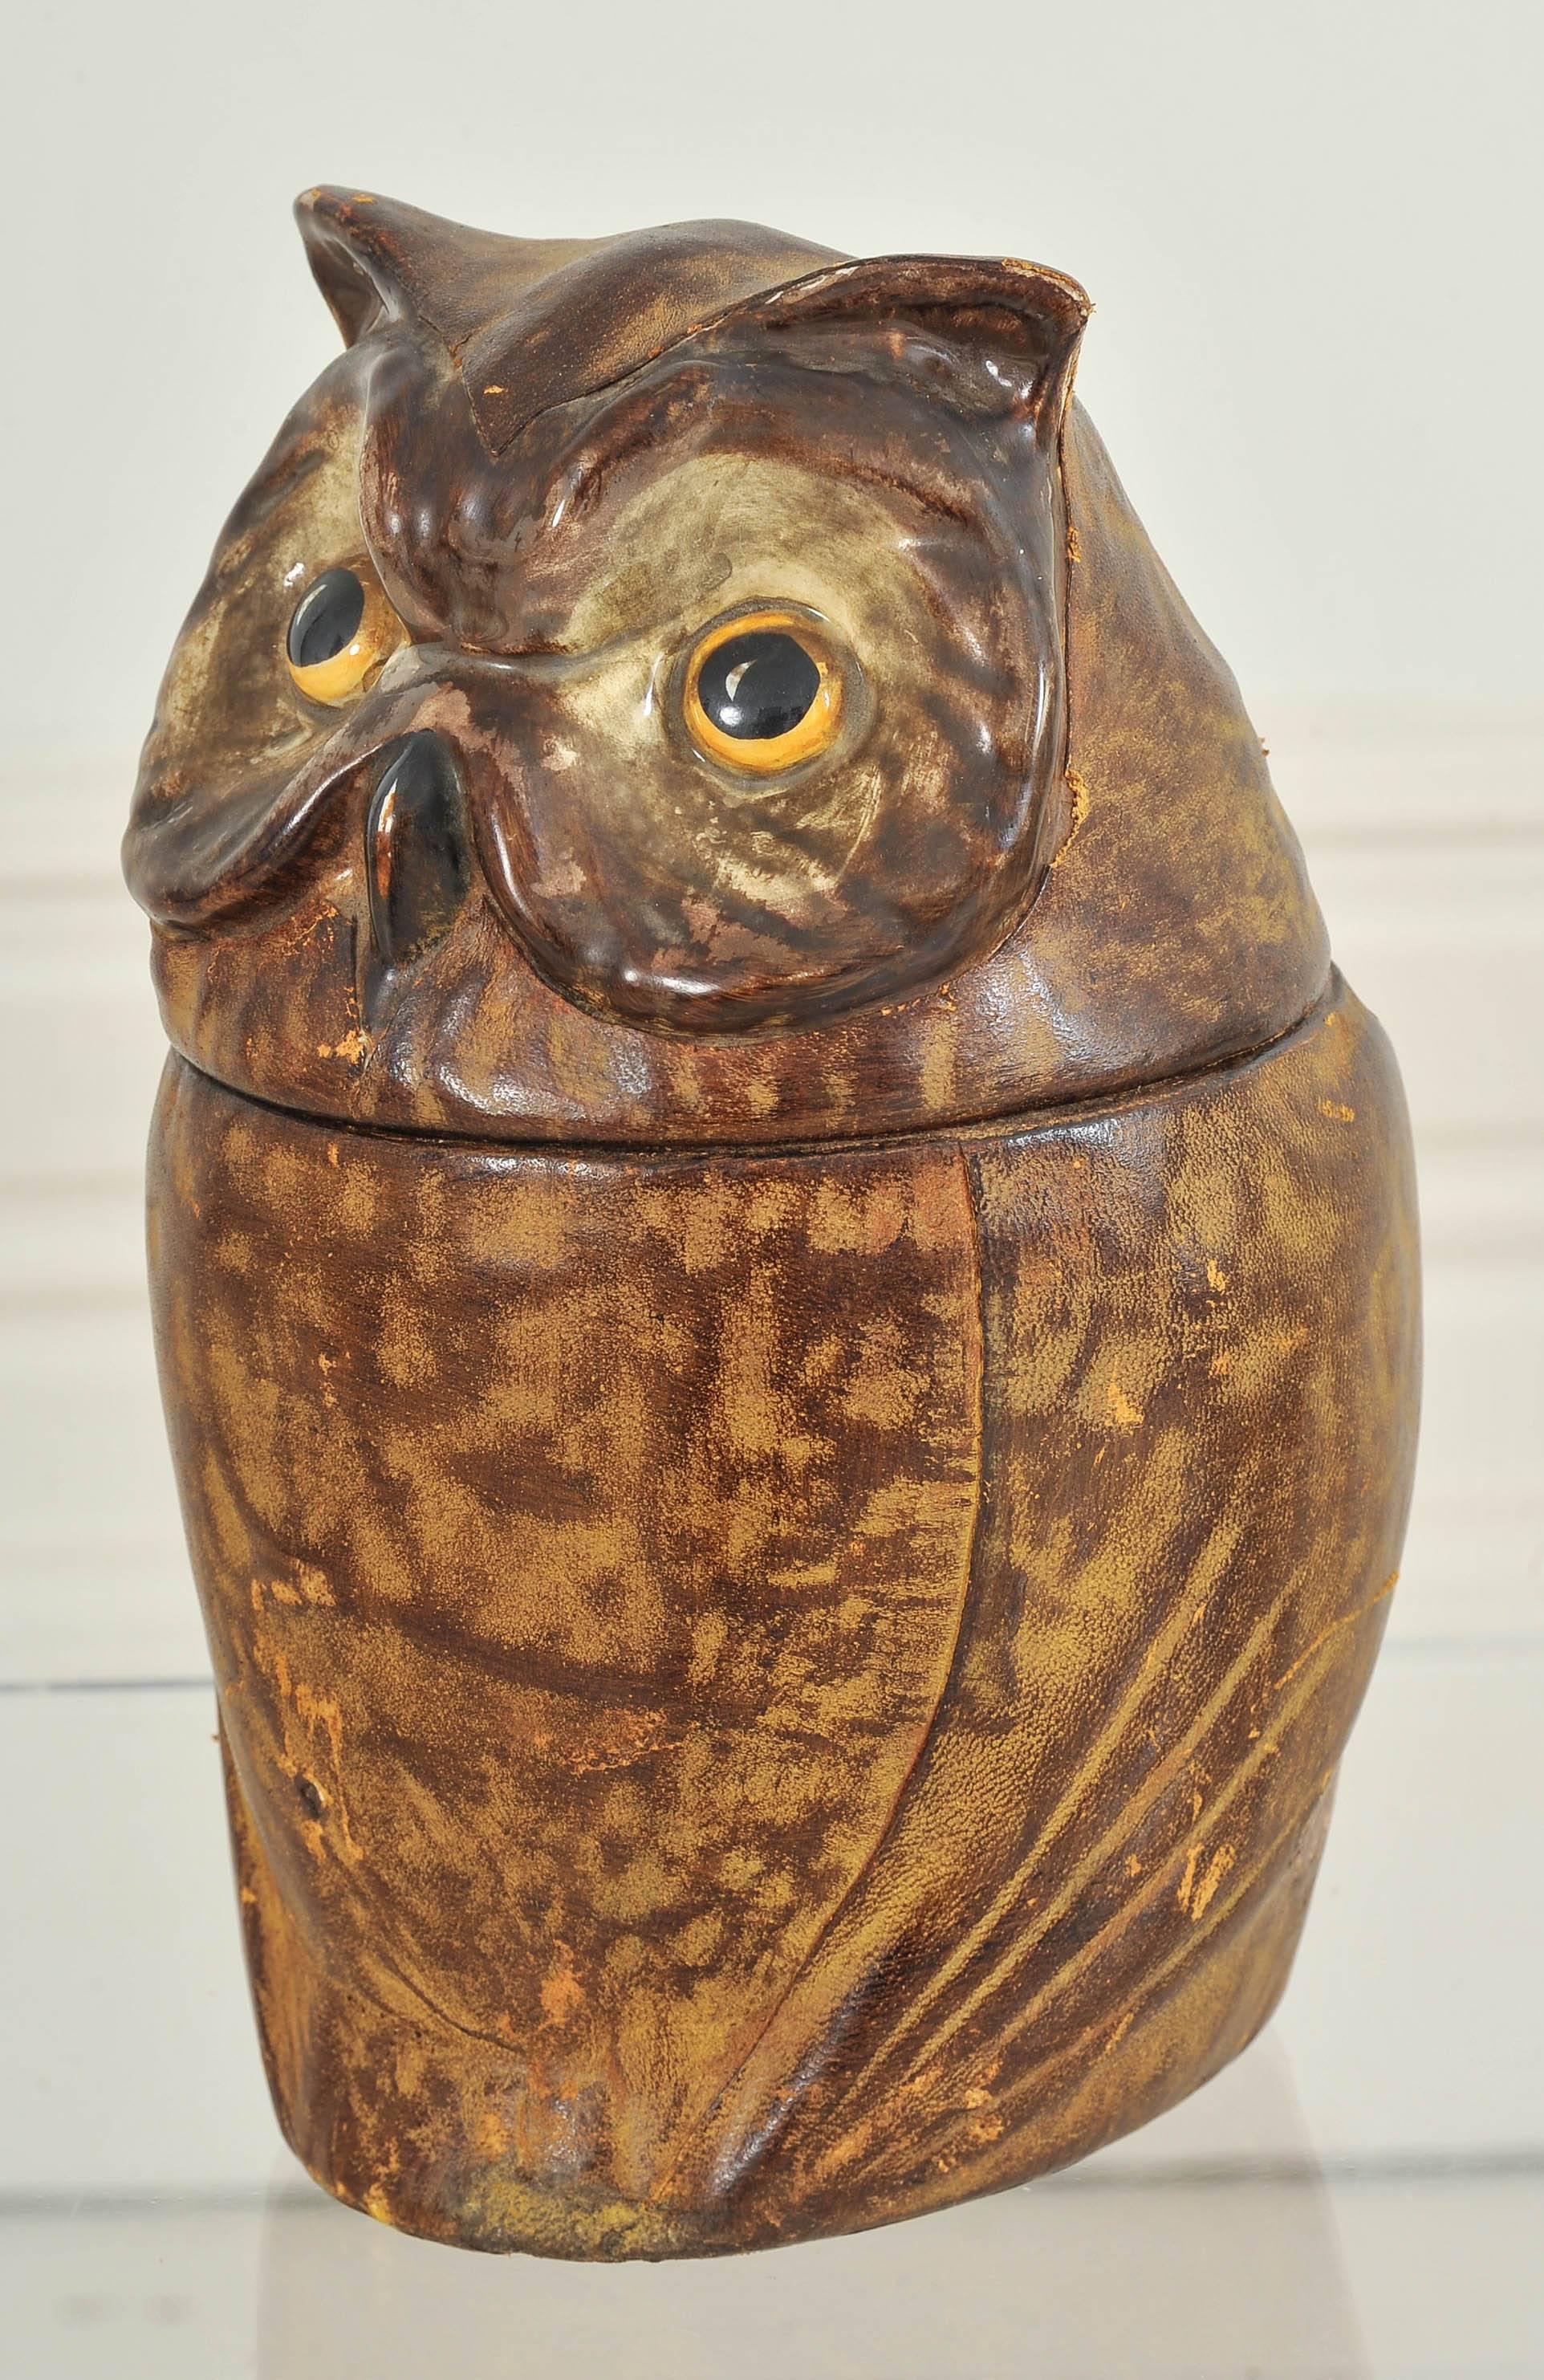 A very unusual French ceramic and leather owl cookie jar.

Shipping: We are happy to ship this item to you for an additional cost. Please contact us for a quote.